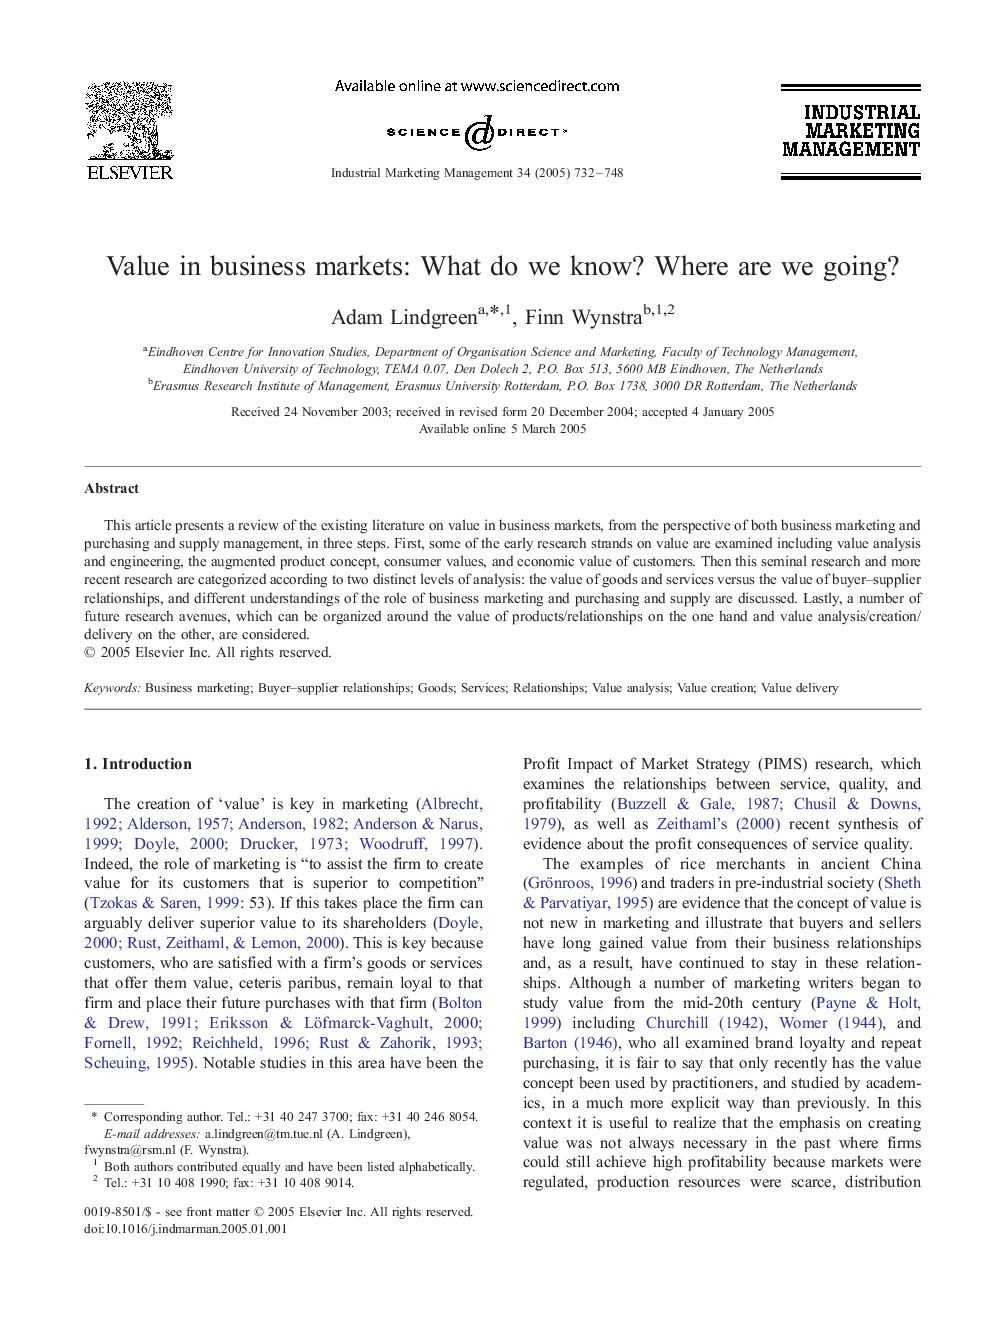 Value in business markets: What do we know? Where are we going?